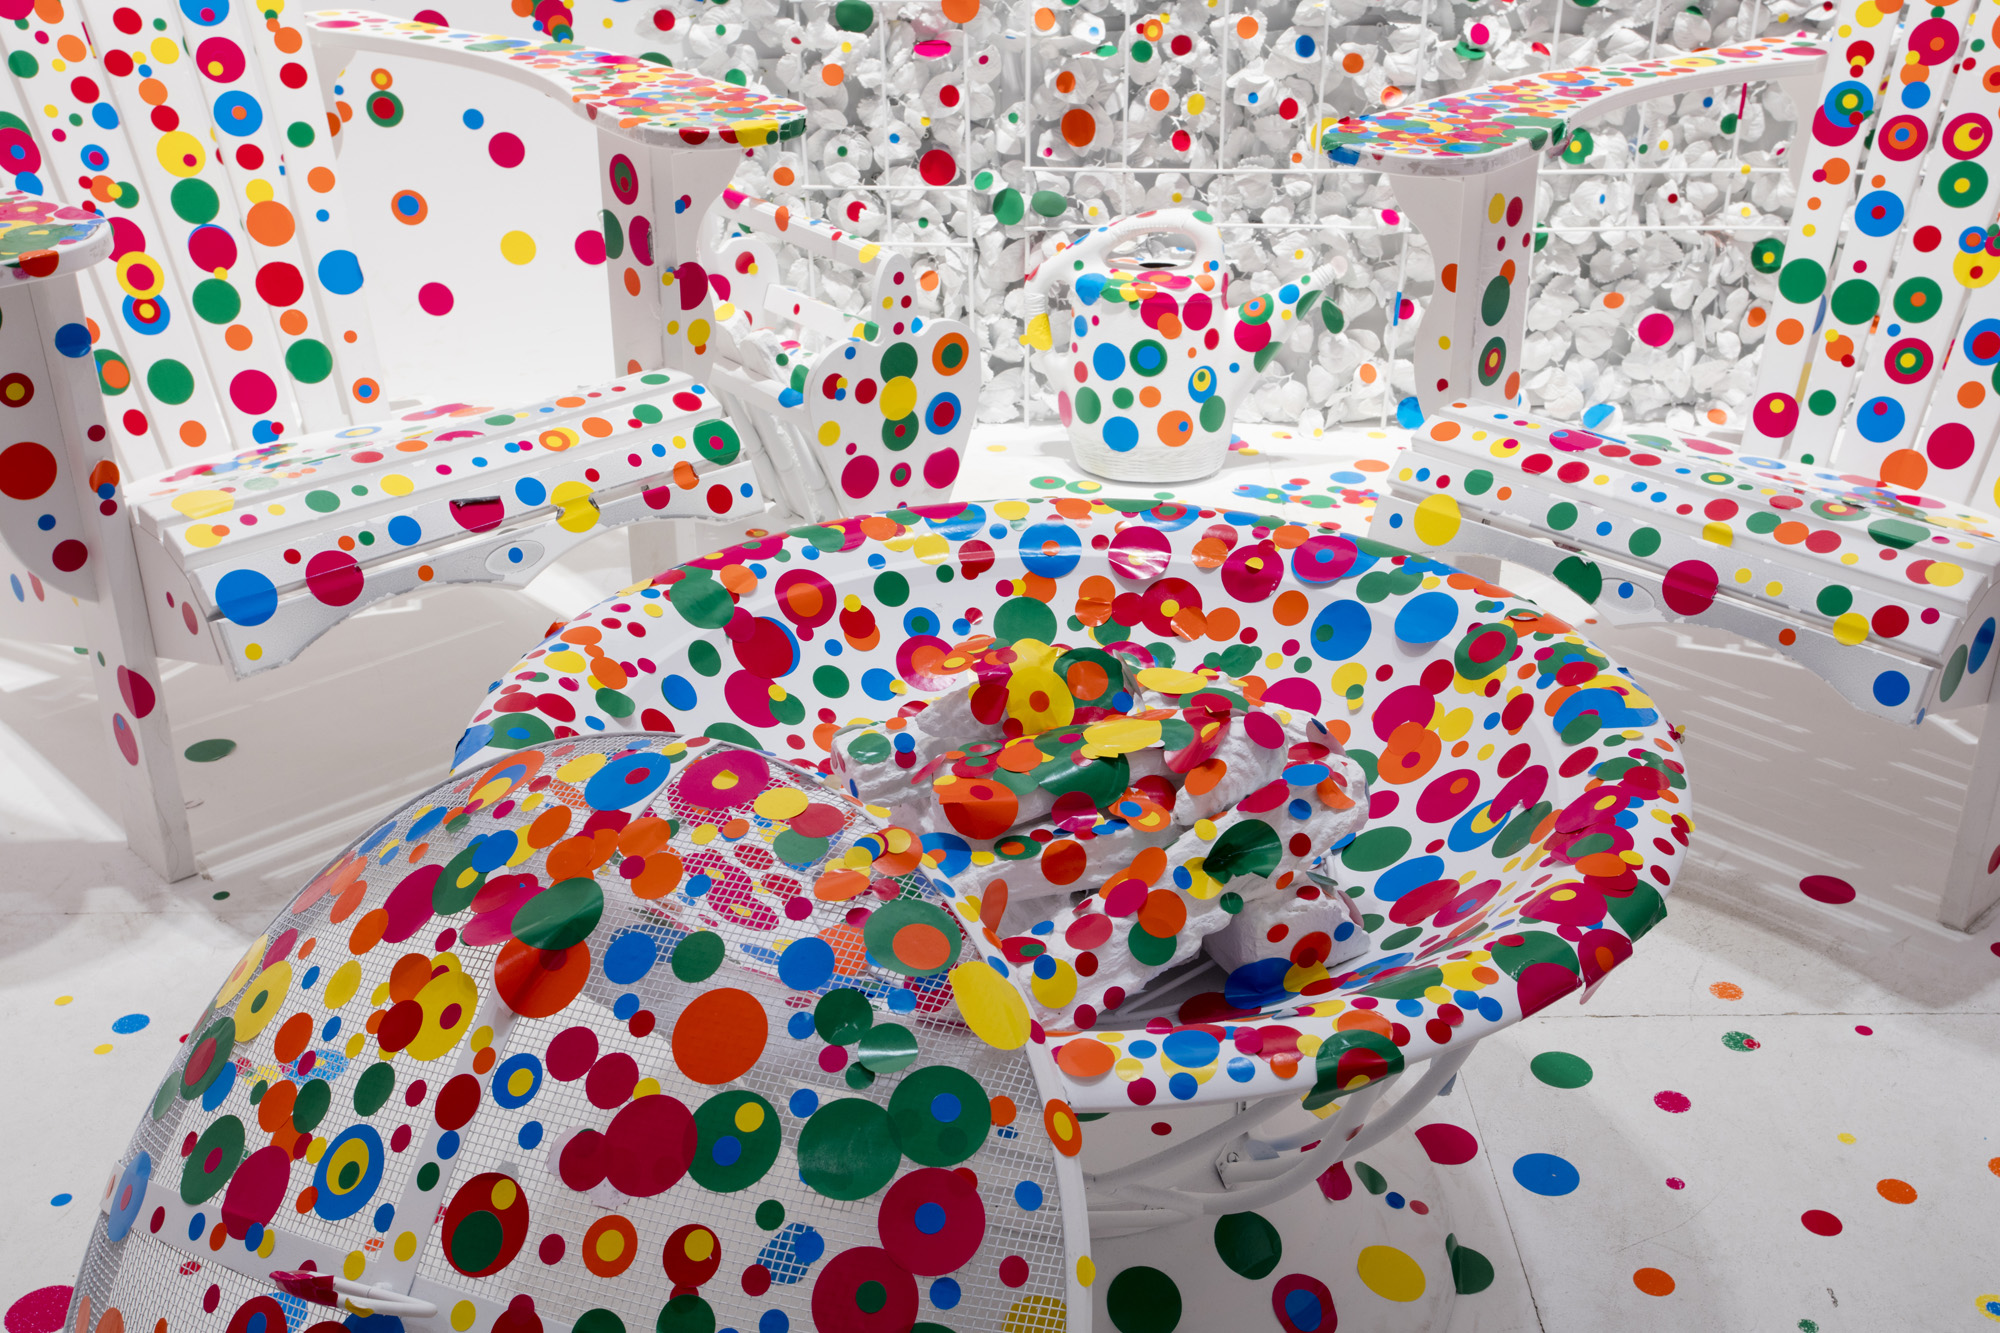 The AGO's The Obliteration Room covered with colourful dot stickers